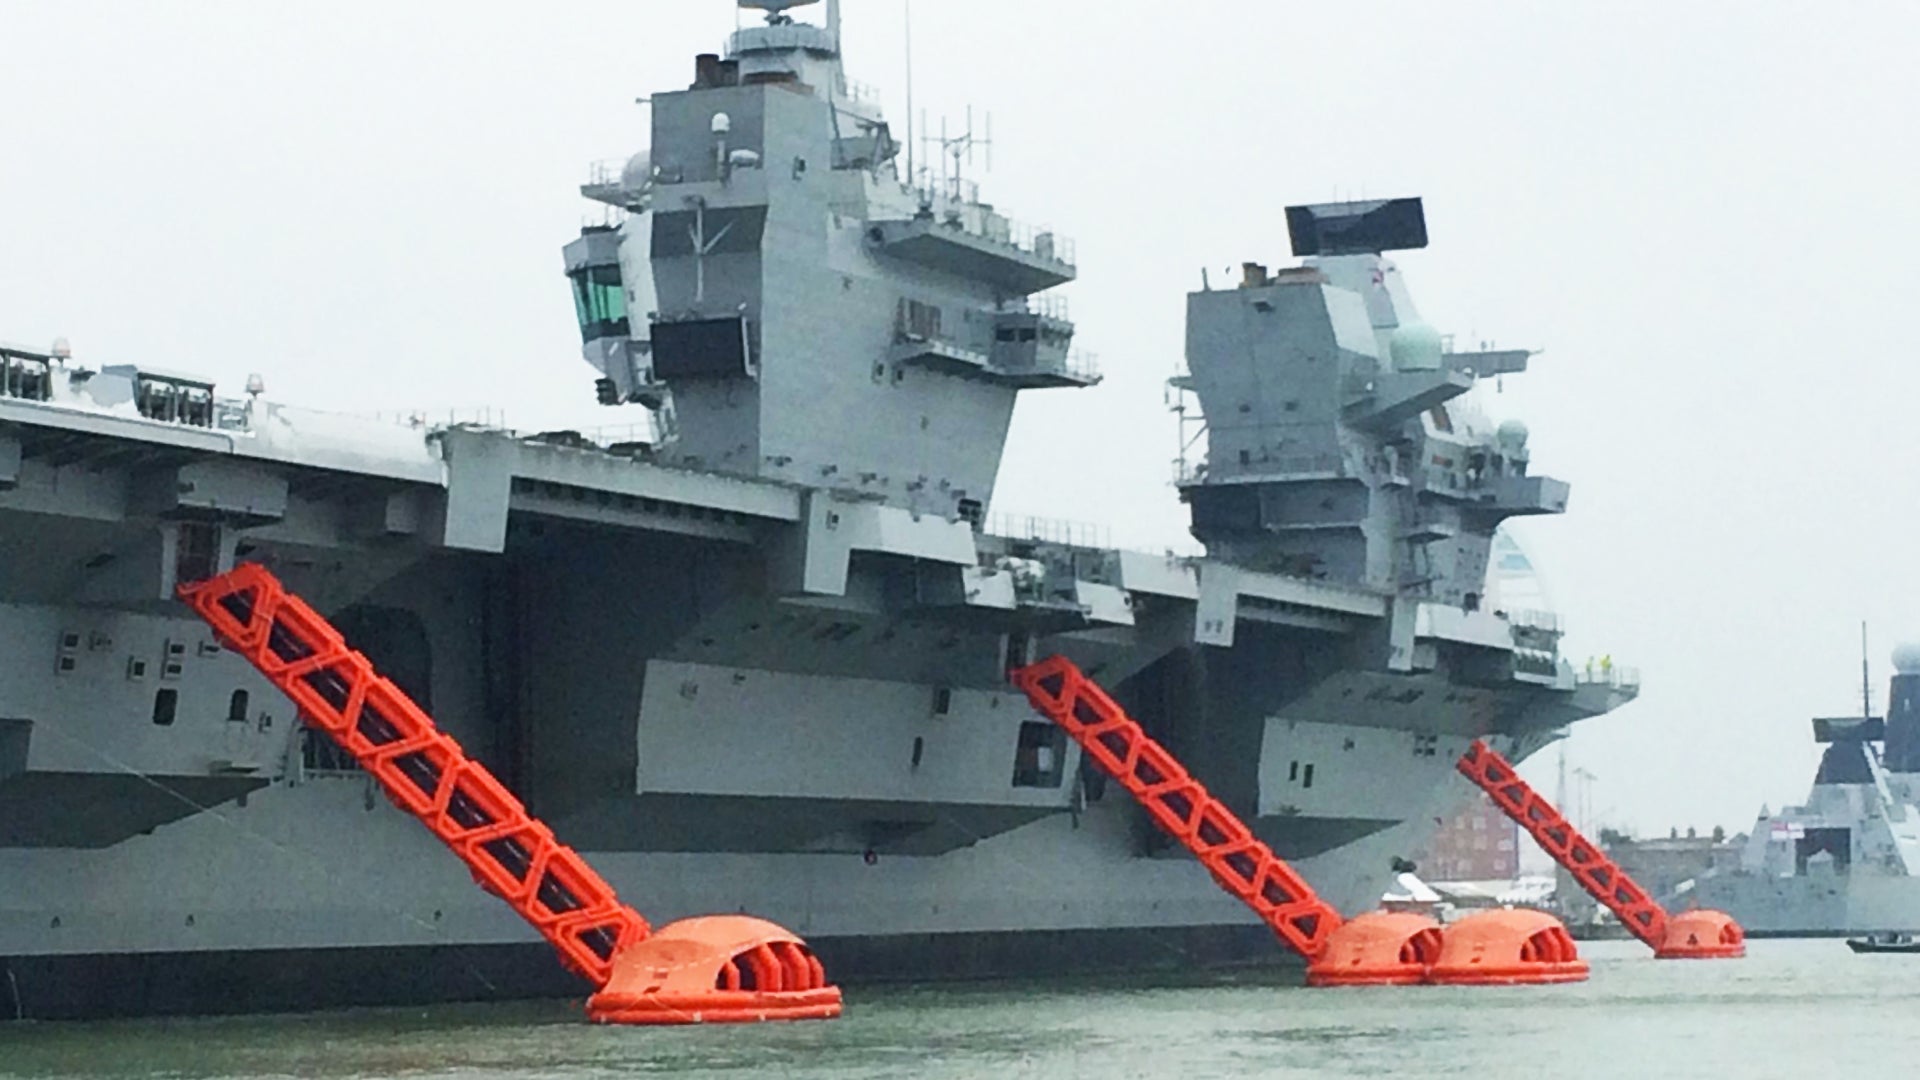 The Emergency Slides On The UK’s New Aircraft Carrier Look Like Way Too Much Fun